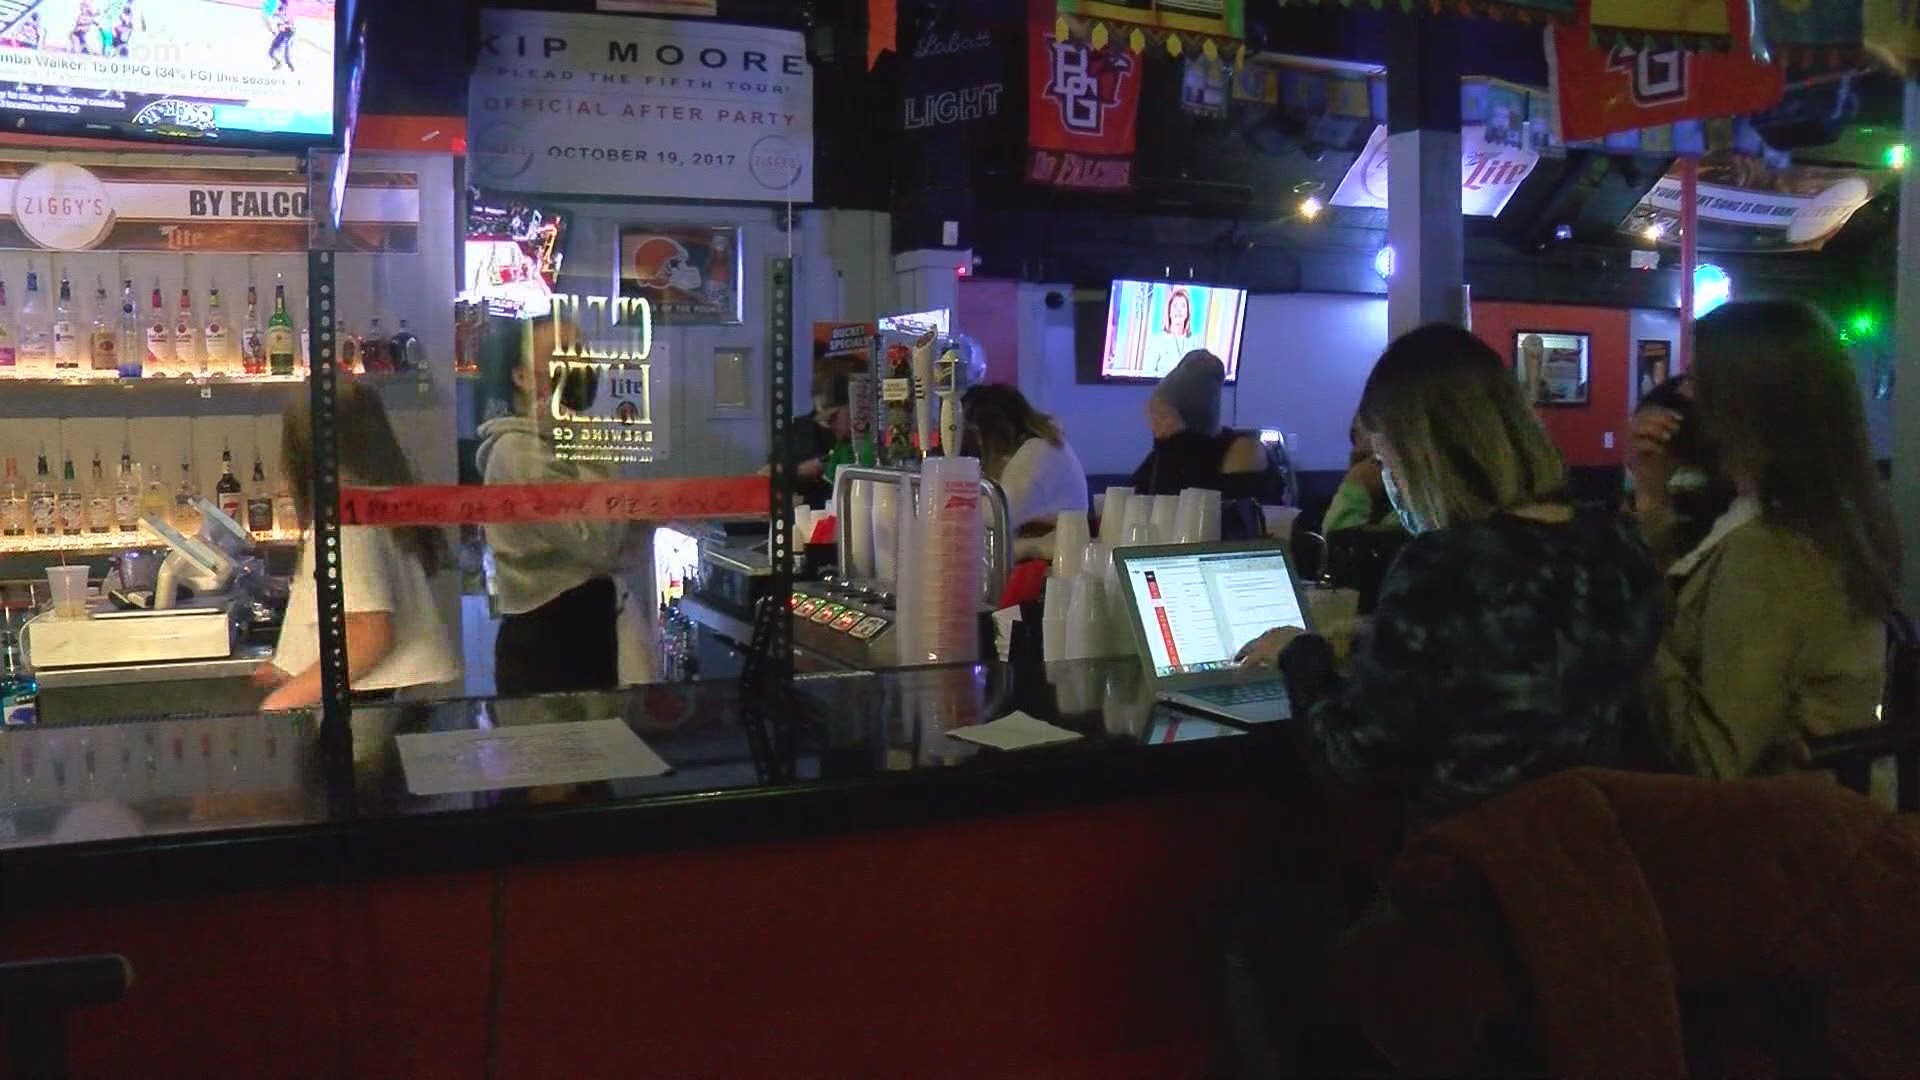 Gov. DeWine lifted Ohio's curfew and last call restrictions after COVID-19 hospitalizations dropped. For bars, it means a return to some normalcy and more business.